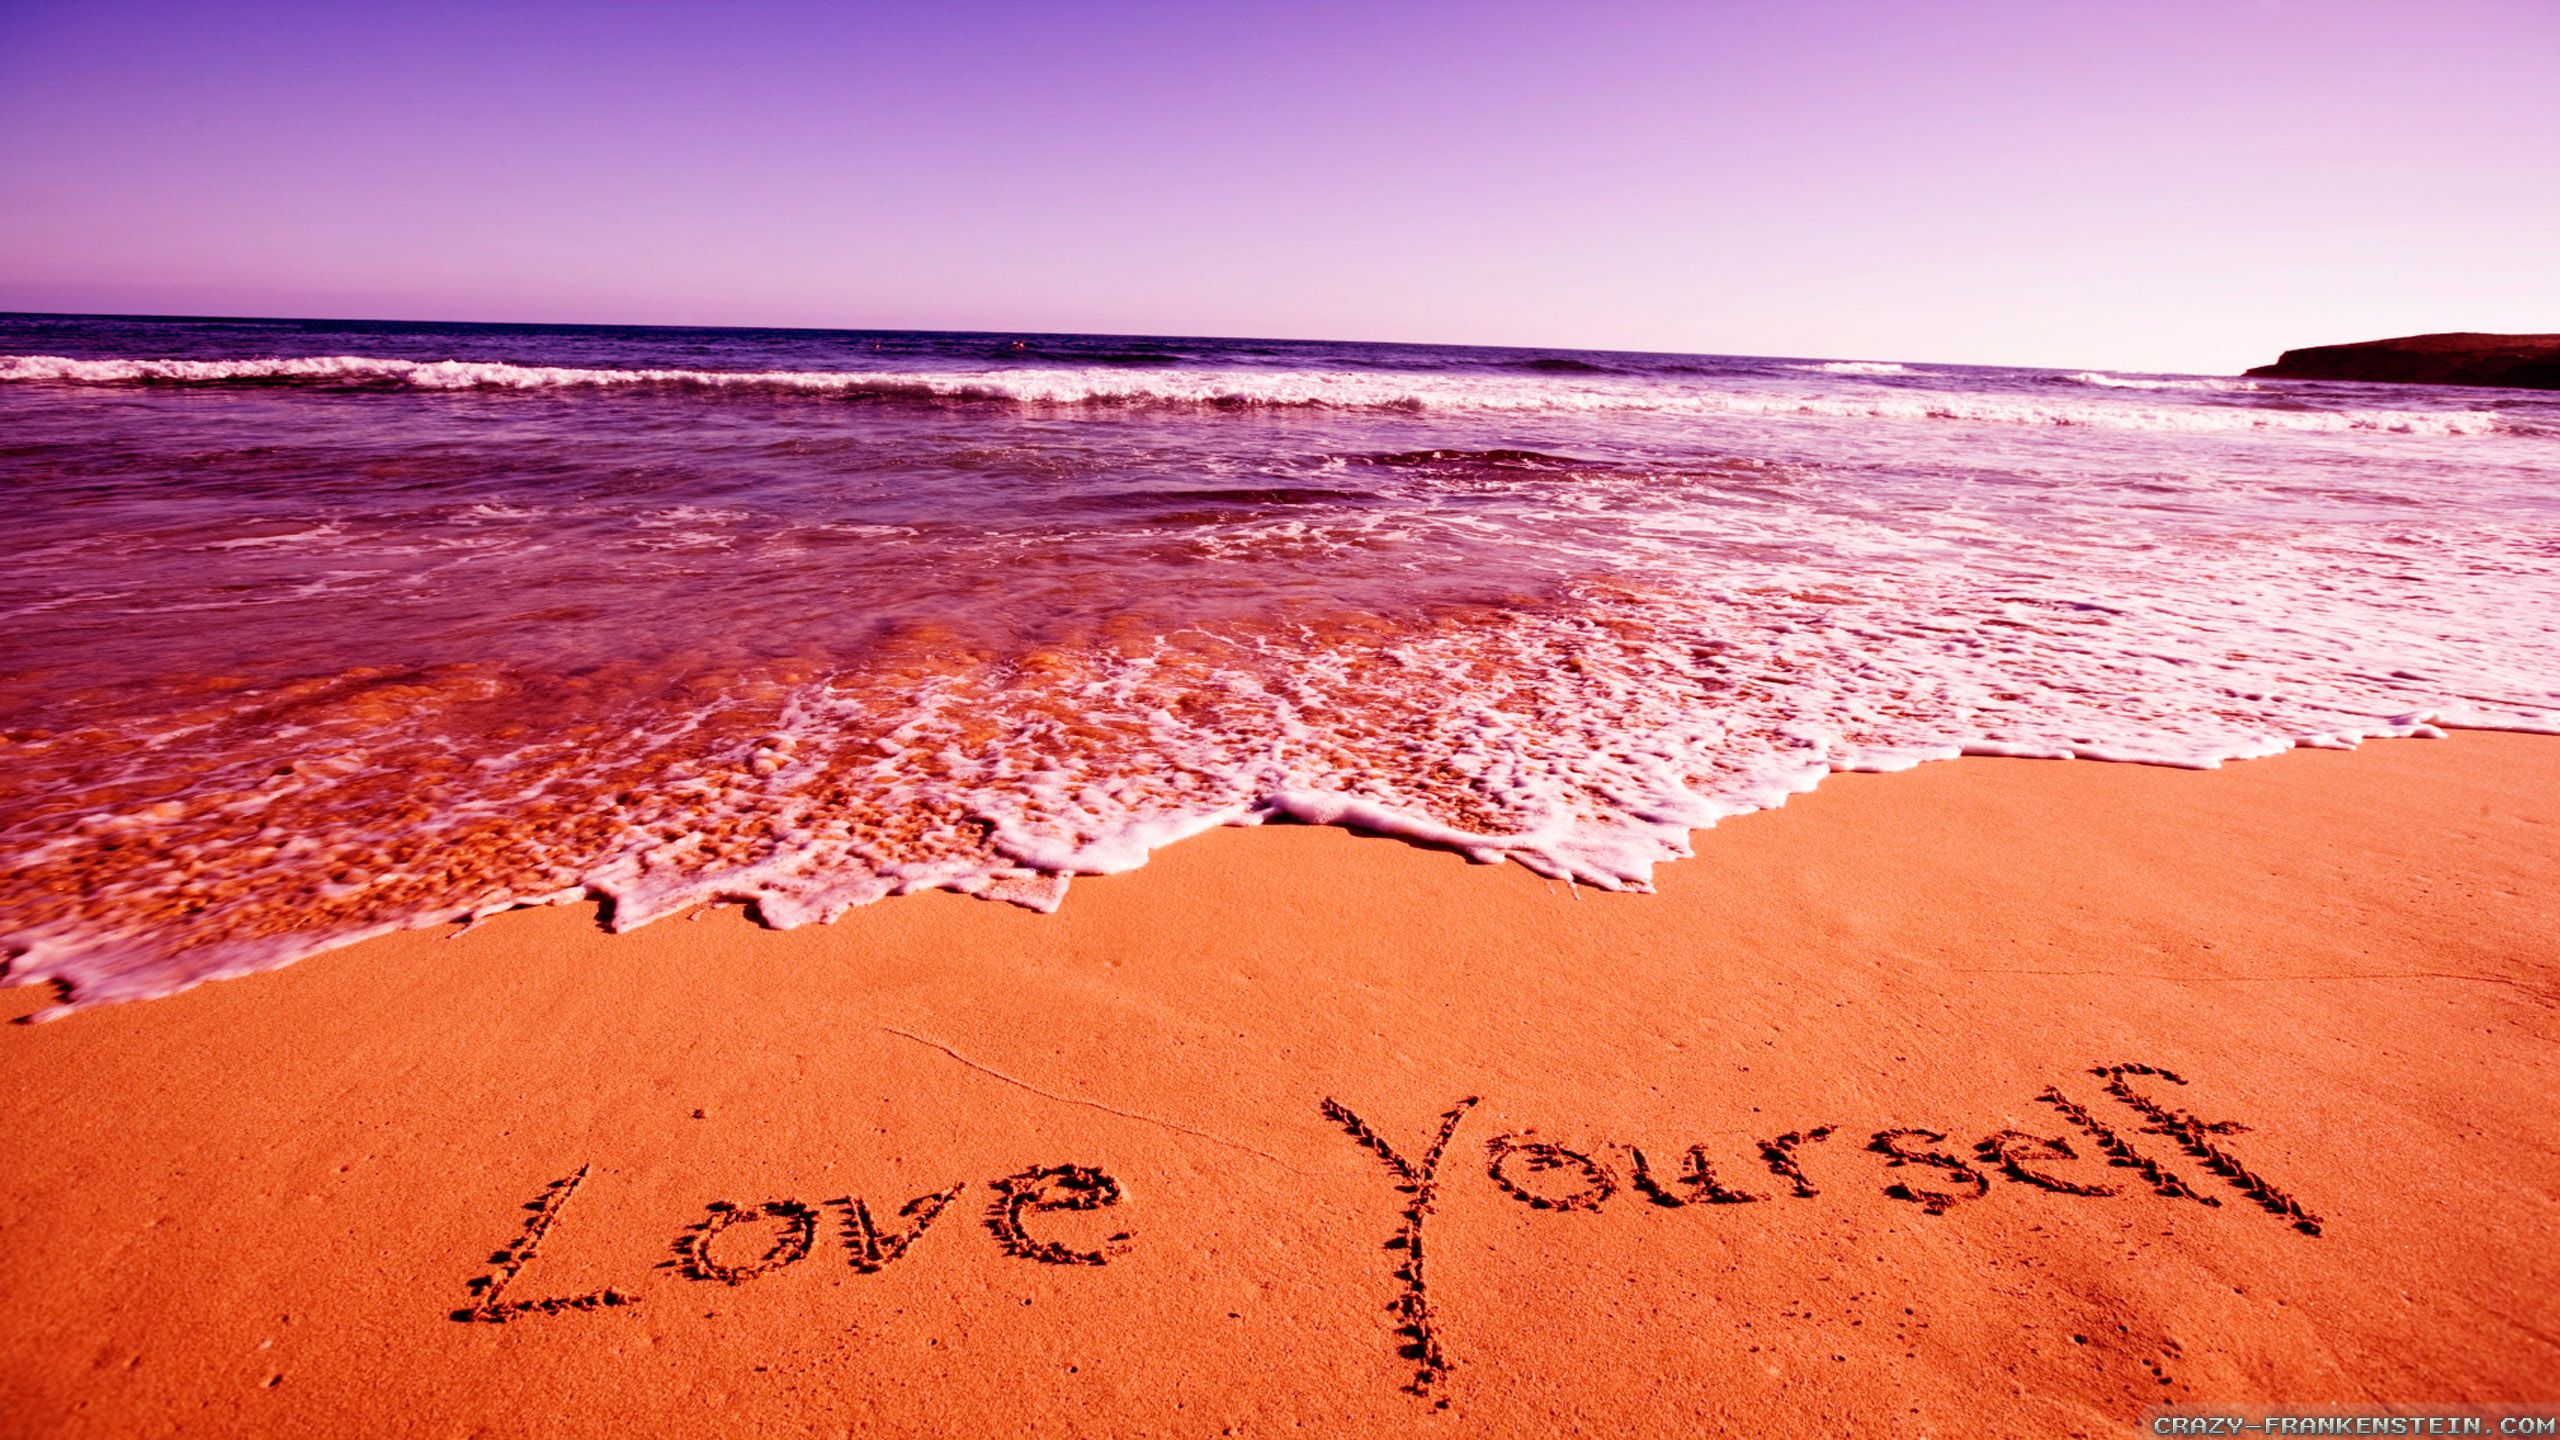 Learn to Love Yourself so that You Can Love Others